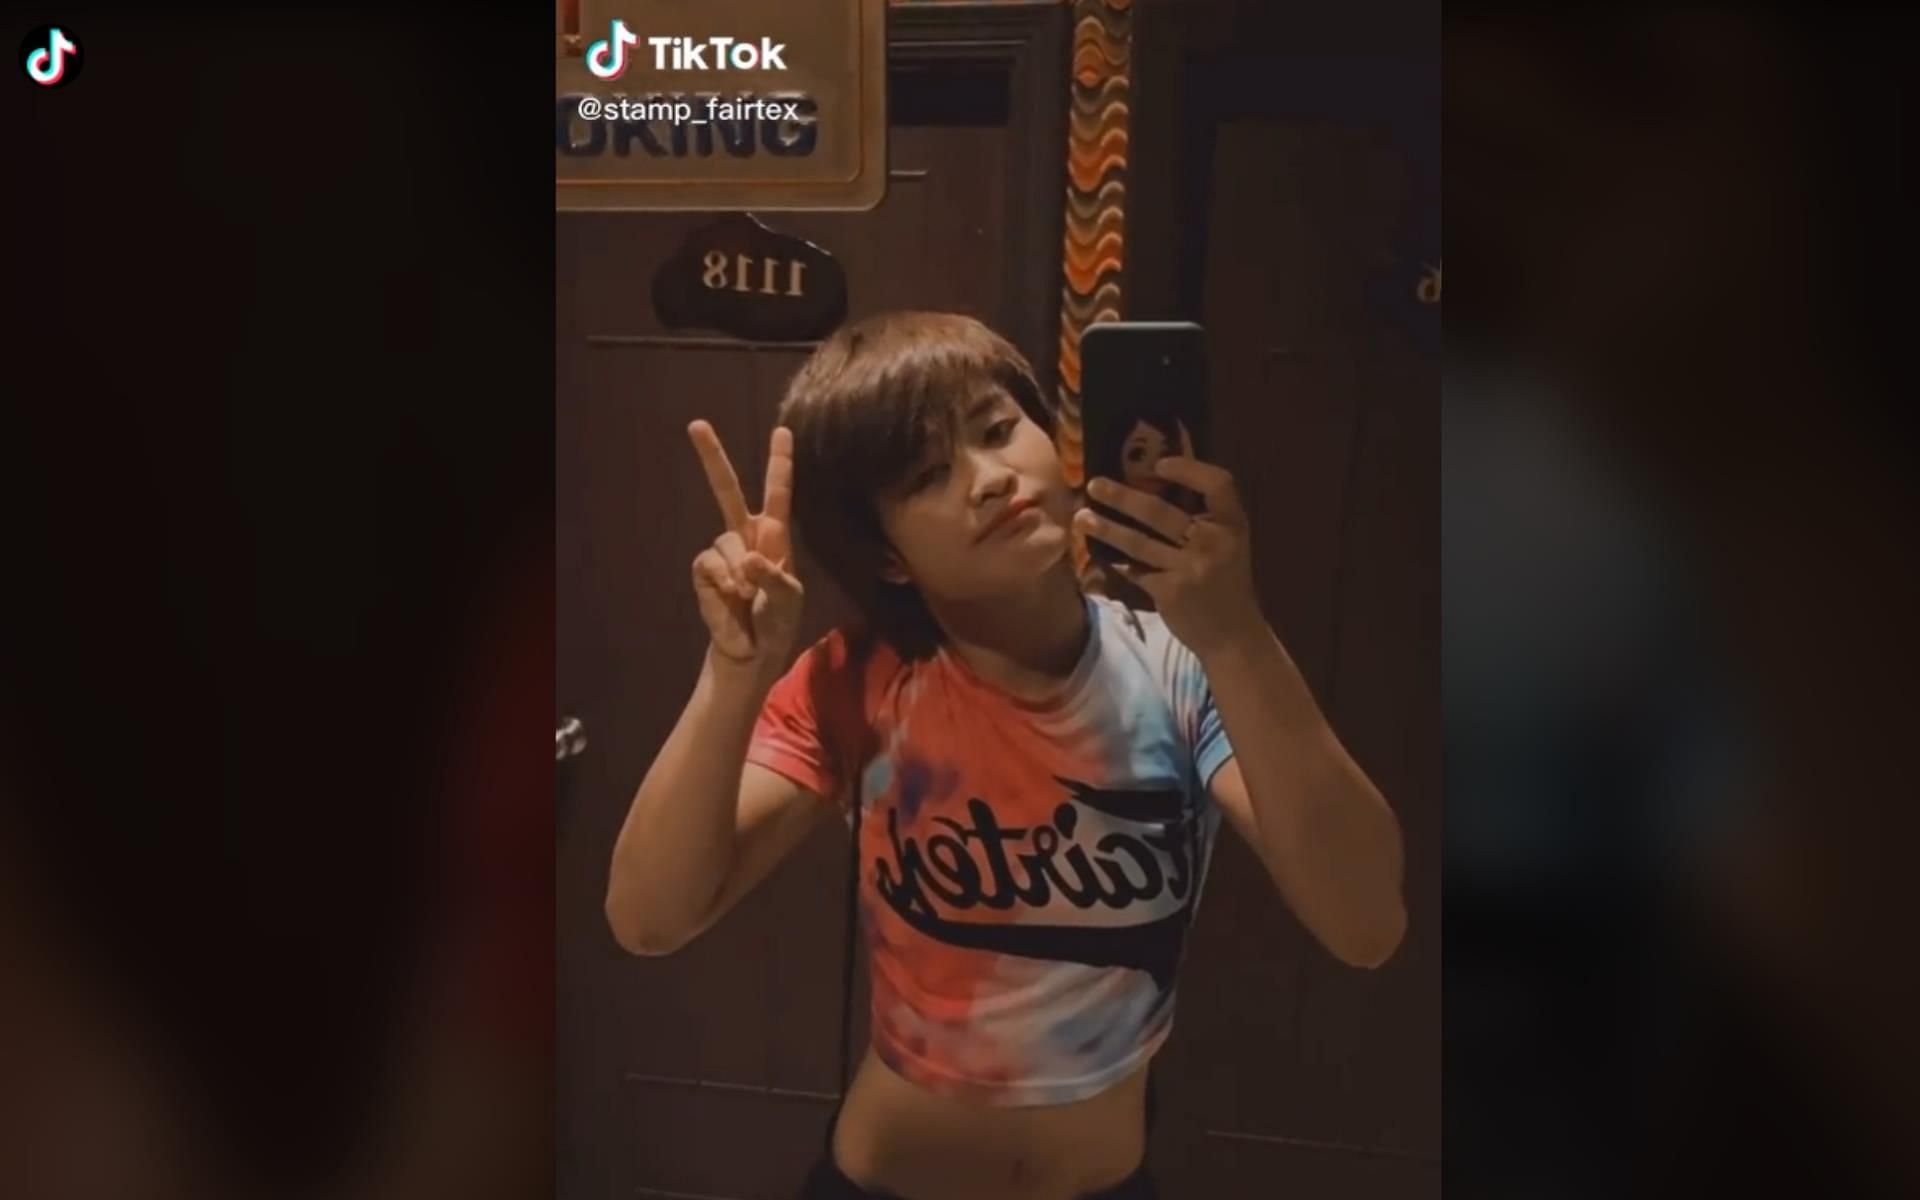 ONE Championship&#039;s Stamp Fairtex shares more of her bubbly personality on her TikTok channel | [Photo: Stamp Fairtex TikTok]